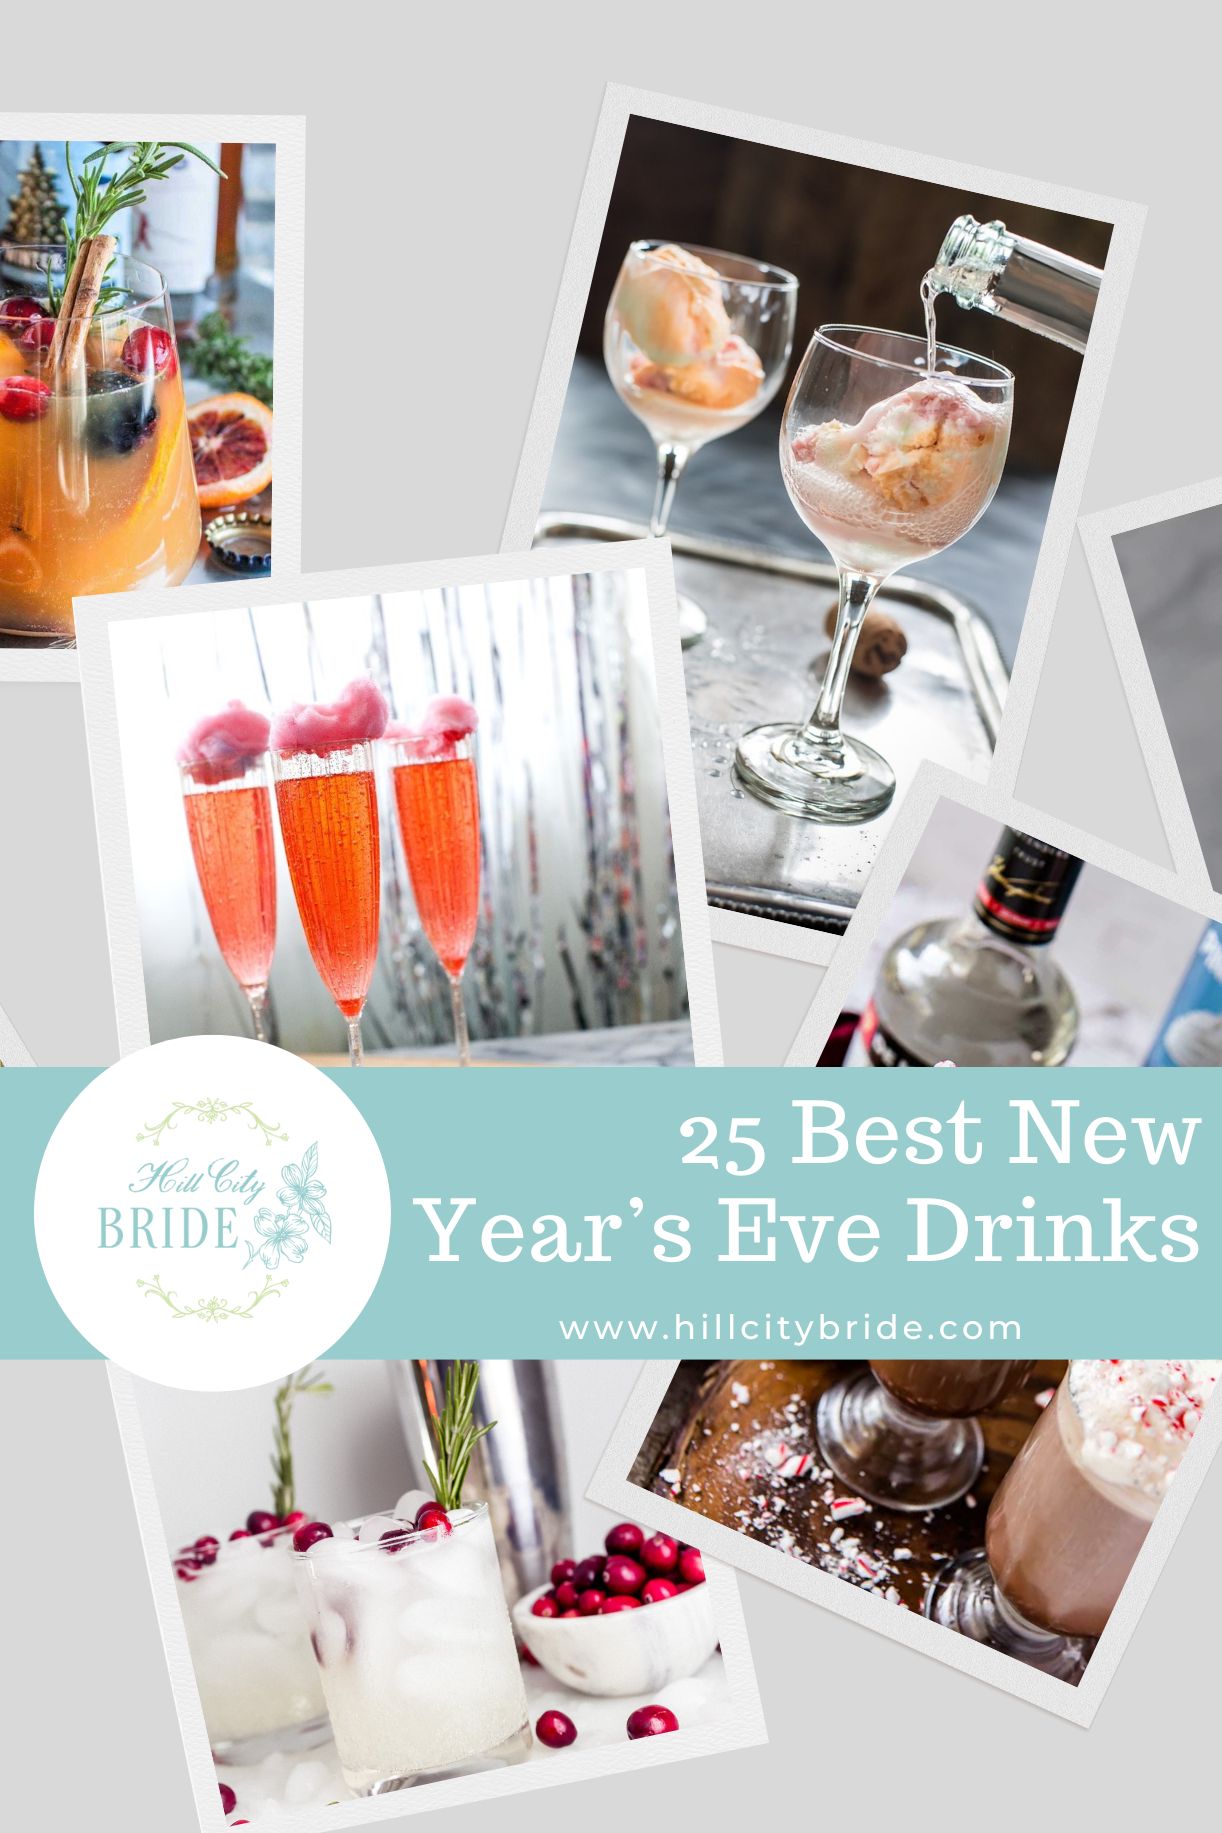 25 of the Best New Year's Eve Drinks